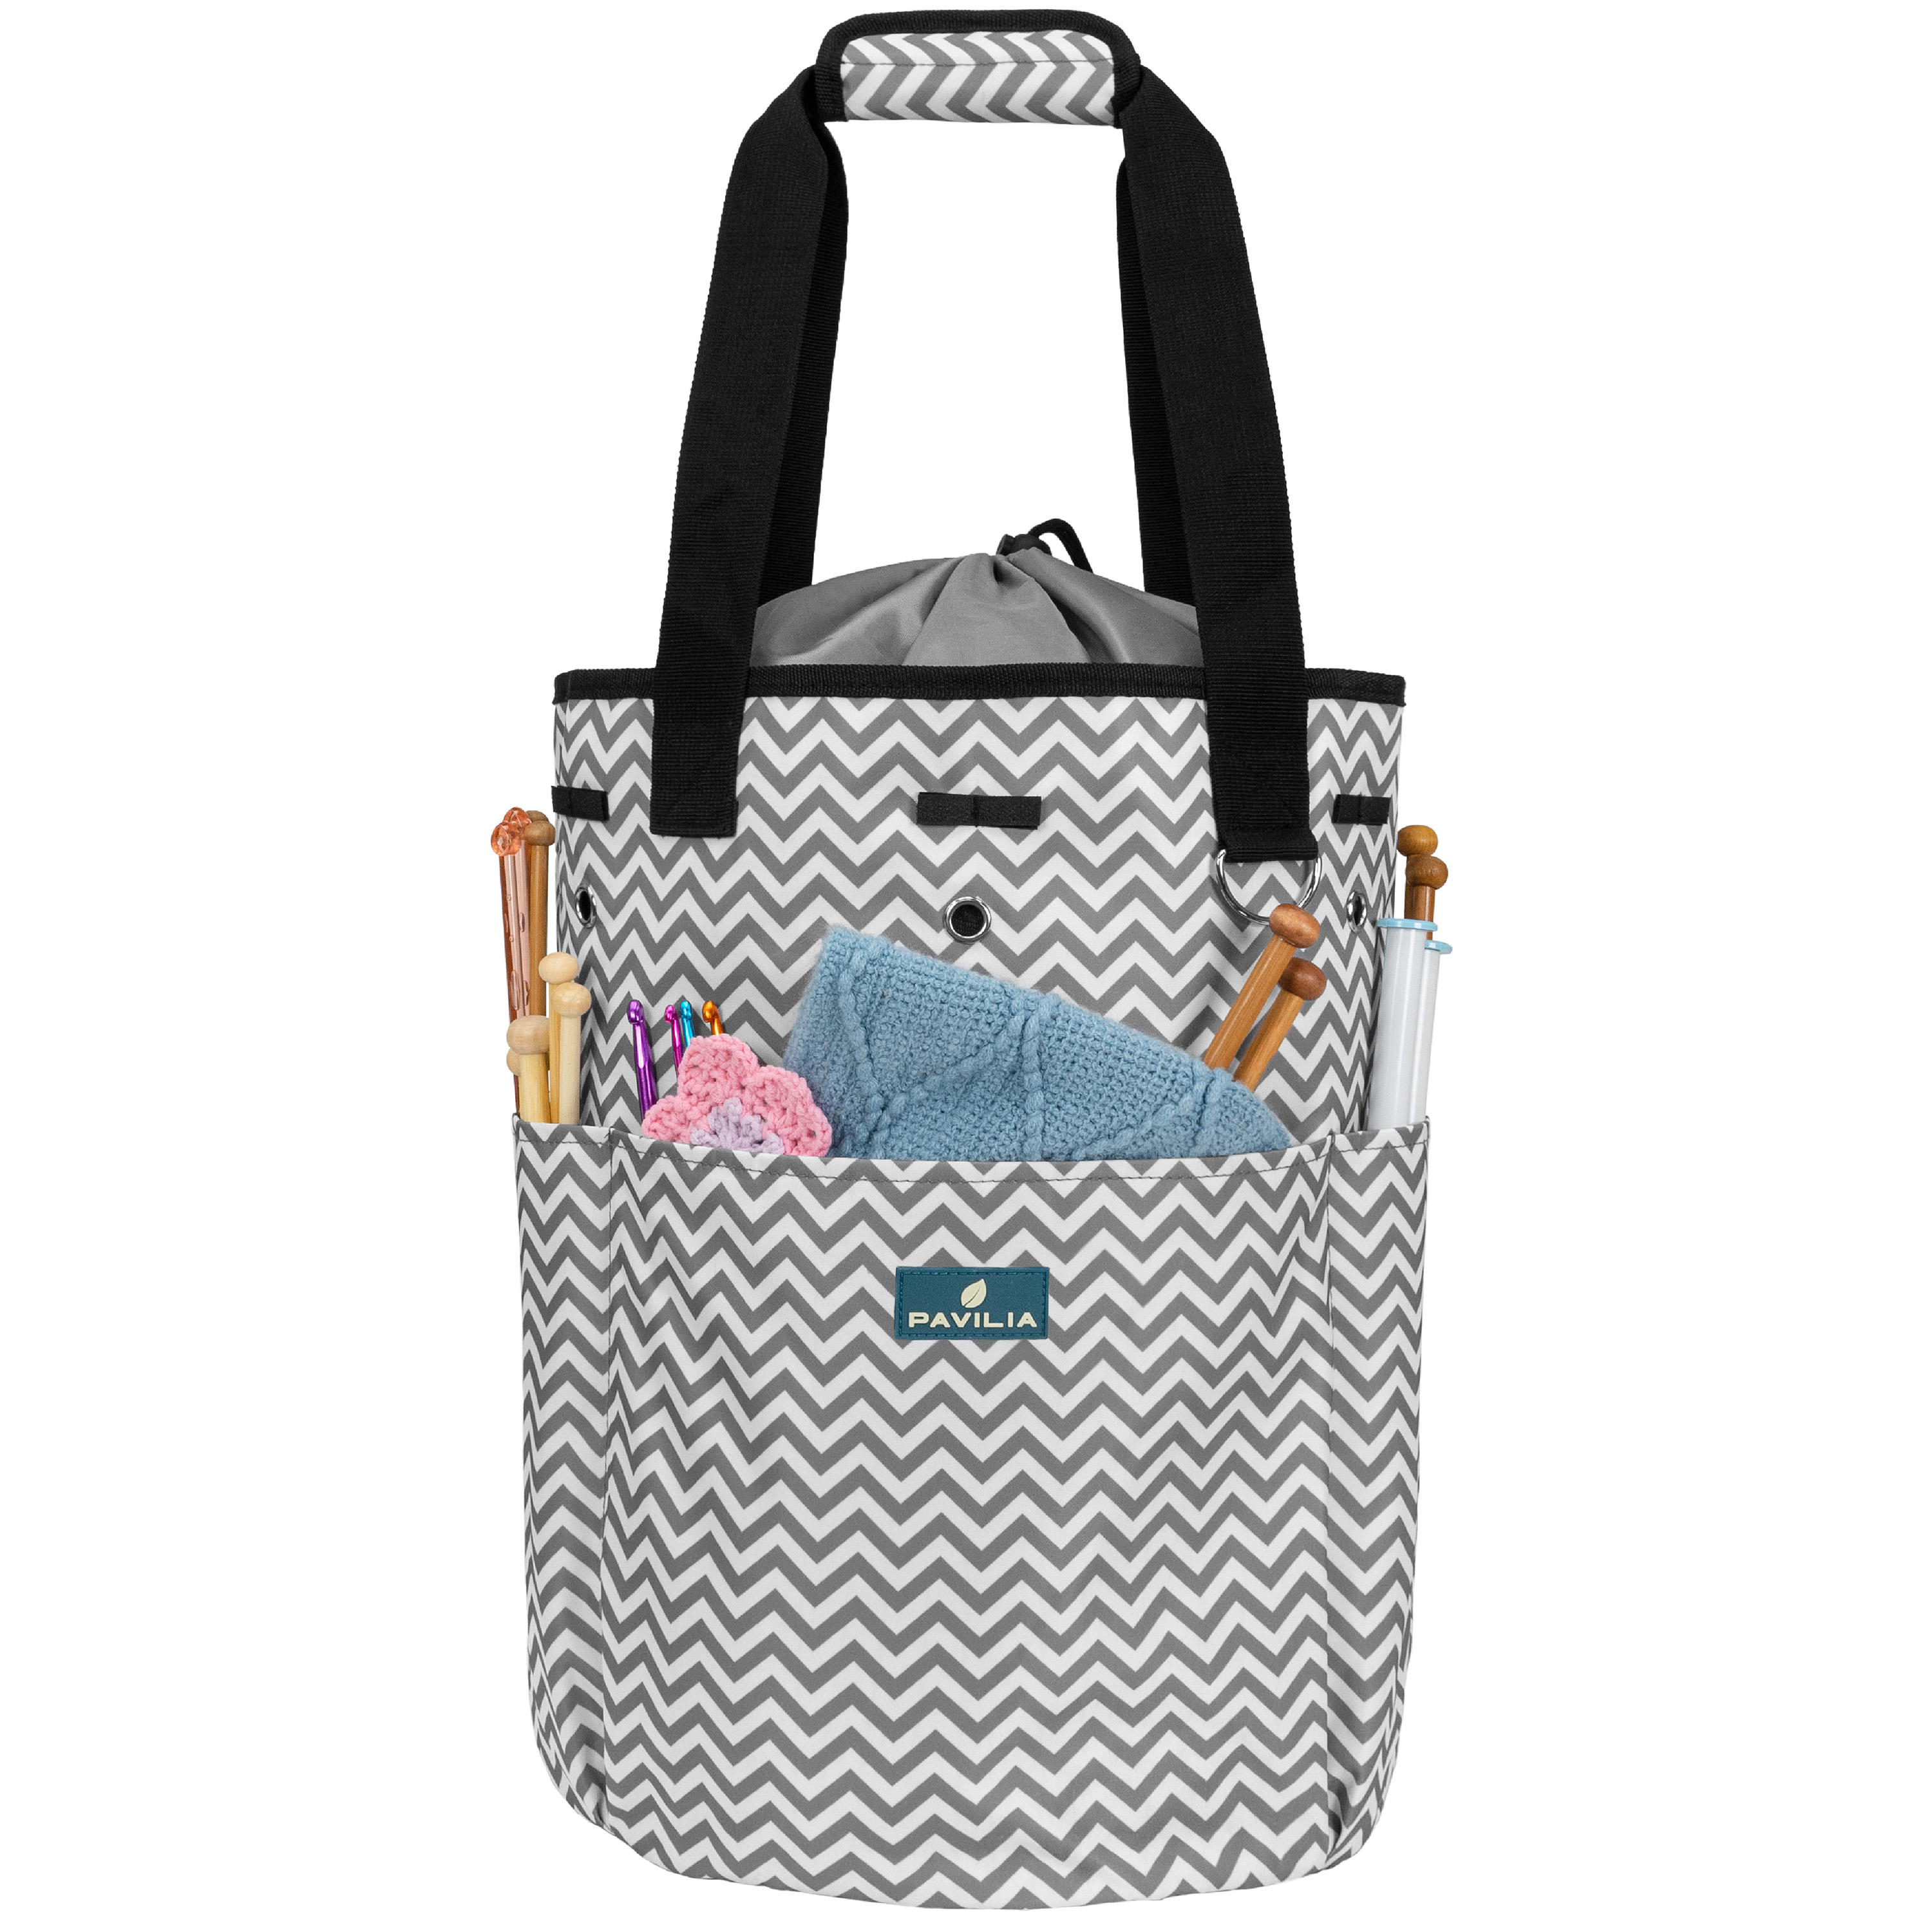 PAVILIA Knitting Bag Crochet Organizer Bag, Yarn Storage Tote, Knitting  Accessories Supplies, Yarn Holder For Knitting With Grommets, Needles Hooks  Essentials, Crochet Project Case (Chevron Gray) 